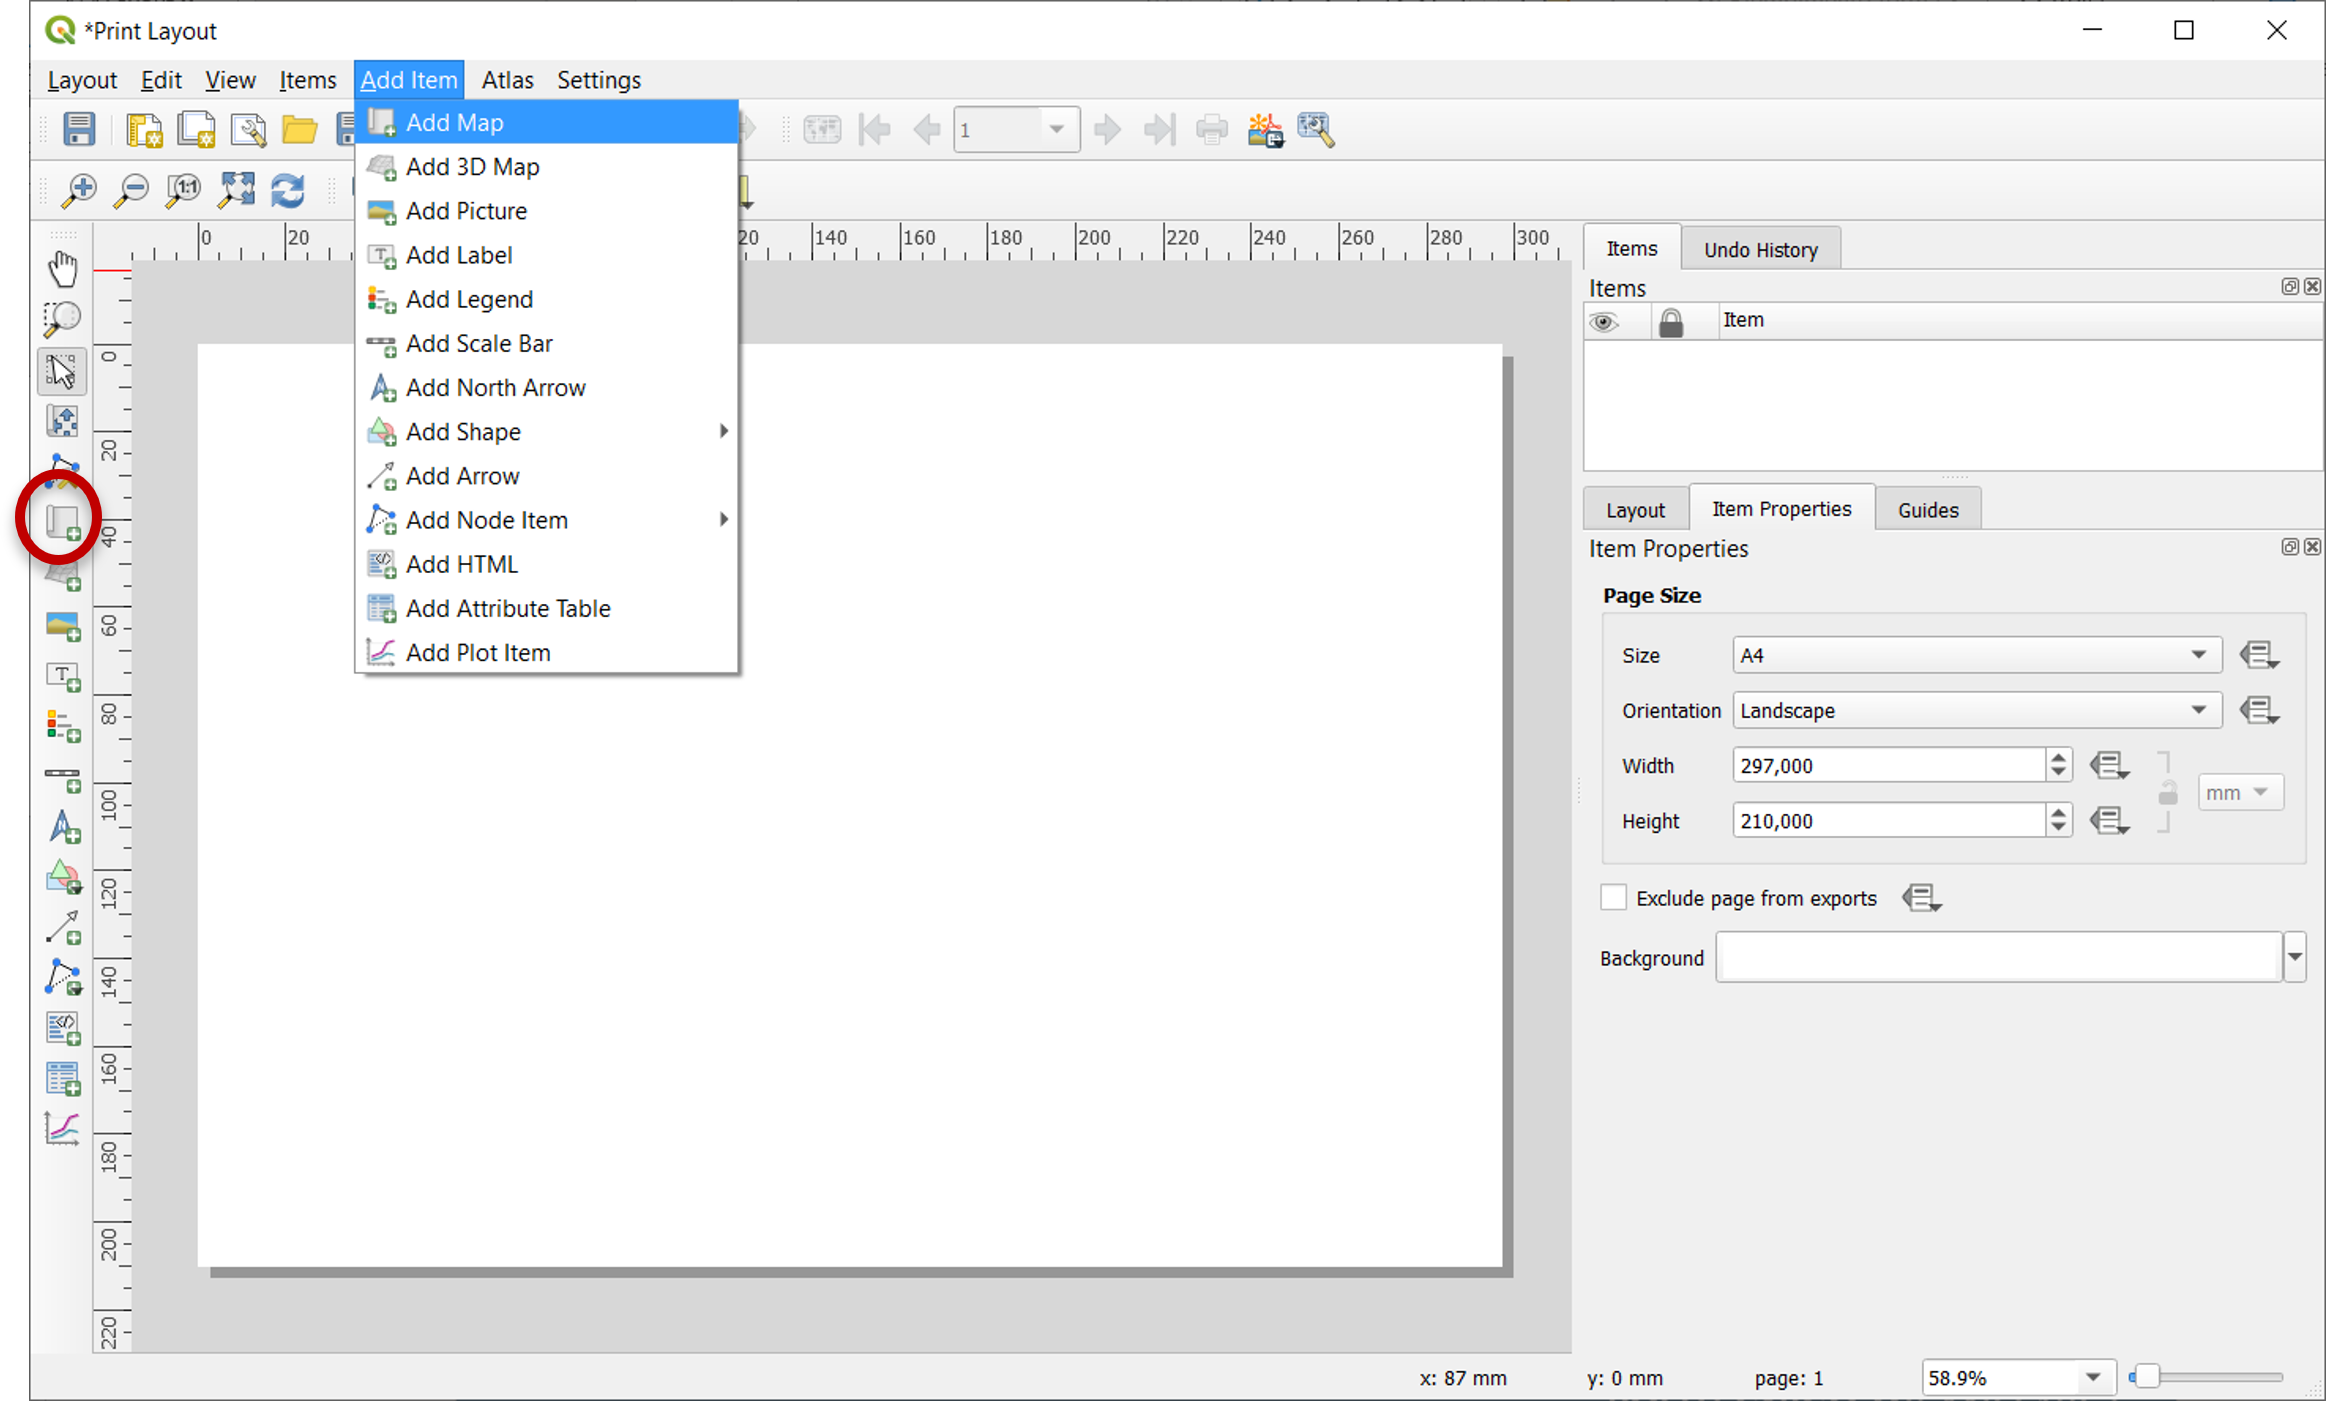 Insertion of a new map object on the QGIS layout composer